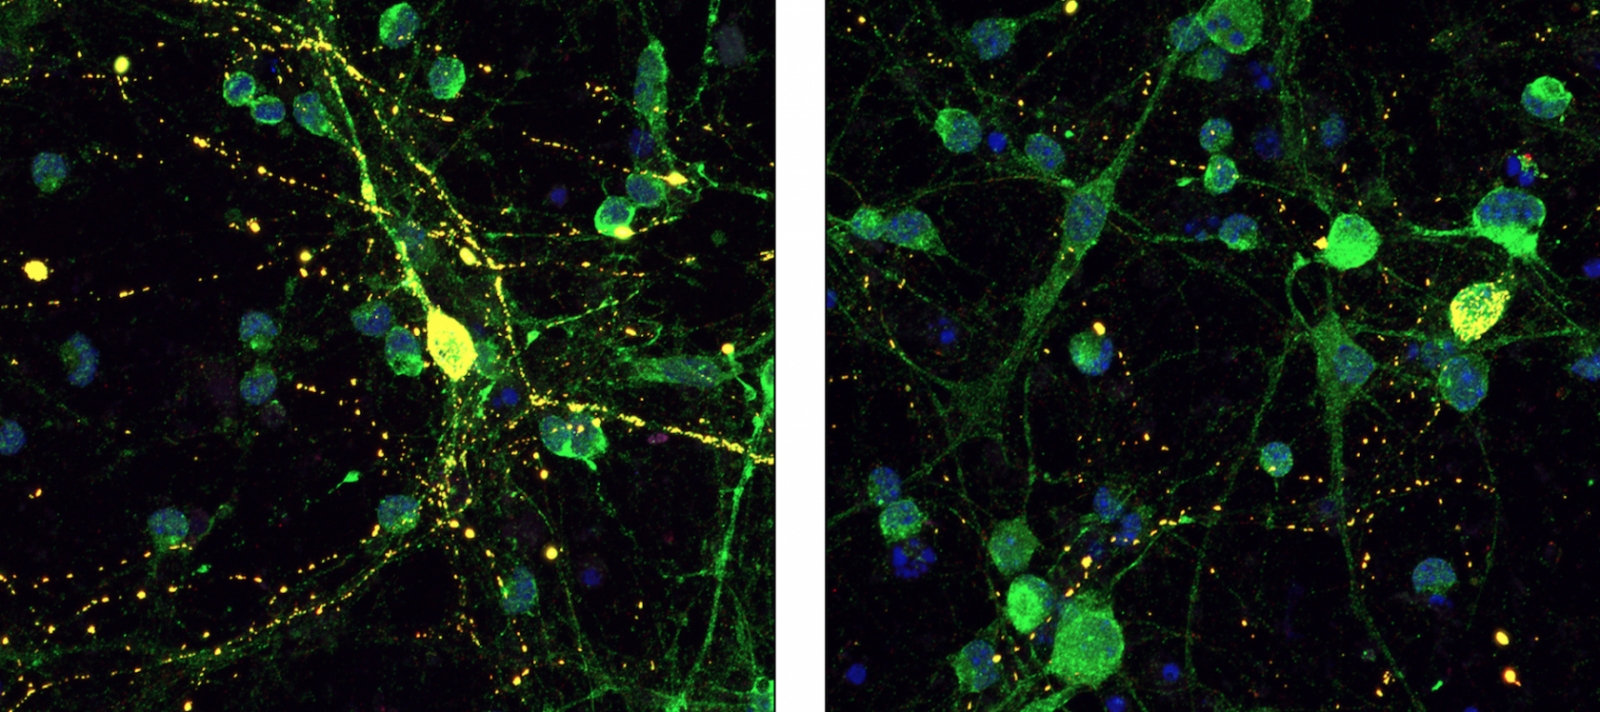 neurons with tau proteins; neurons treated with a peptide have fewer tau proteins